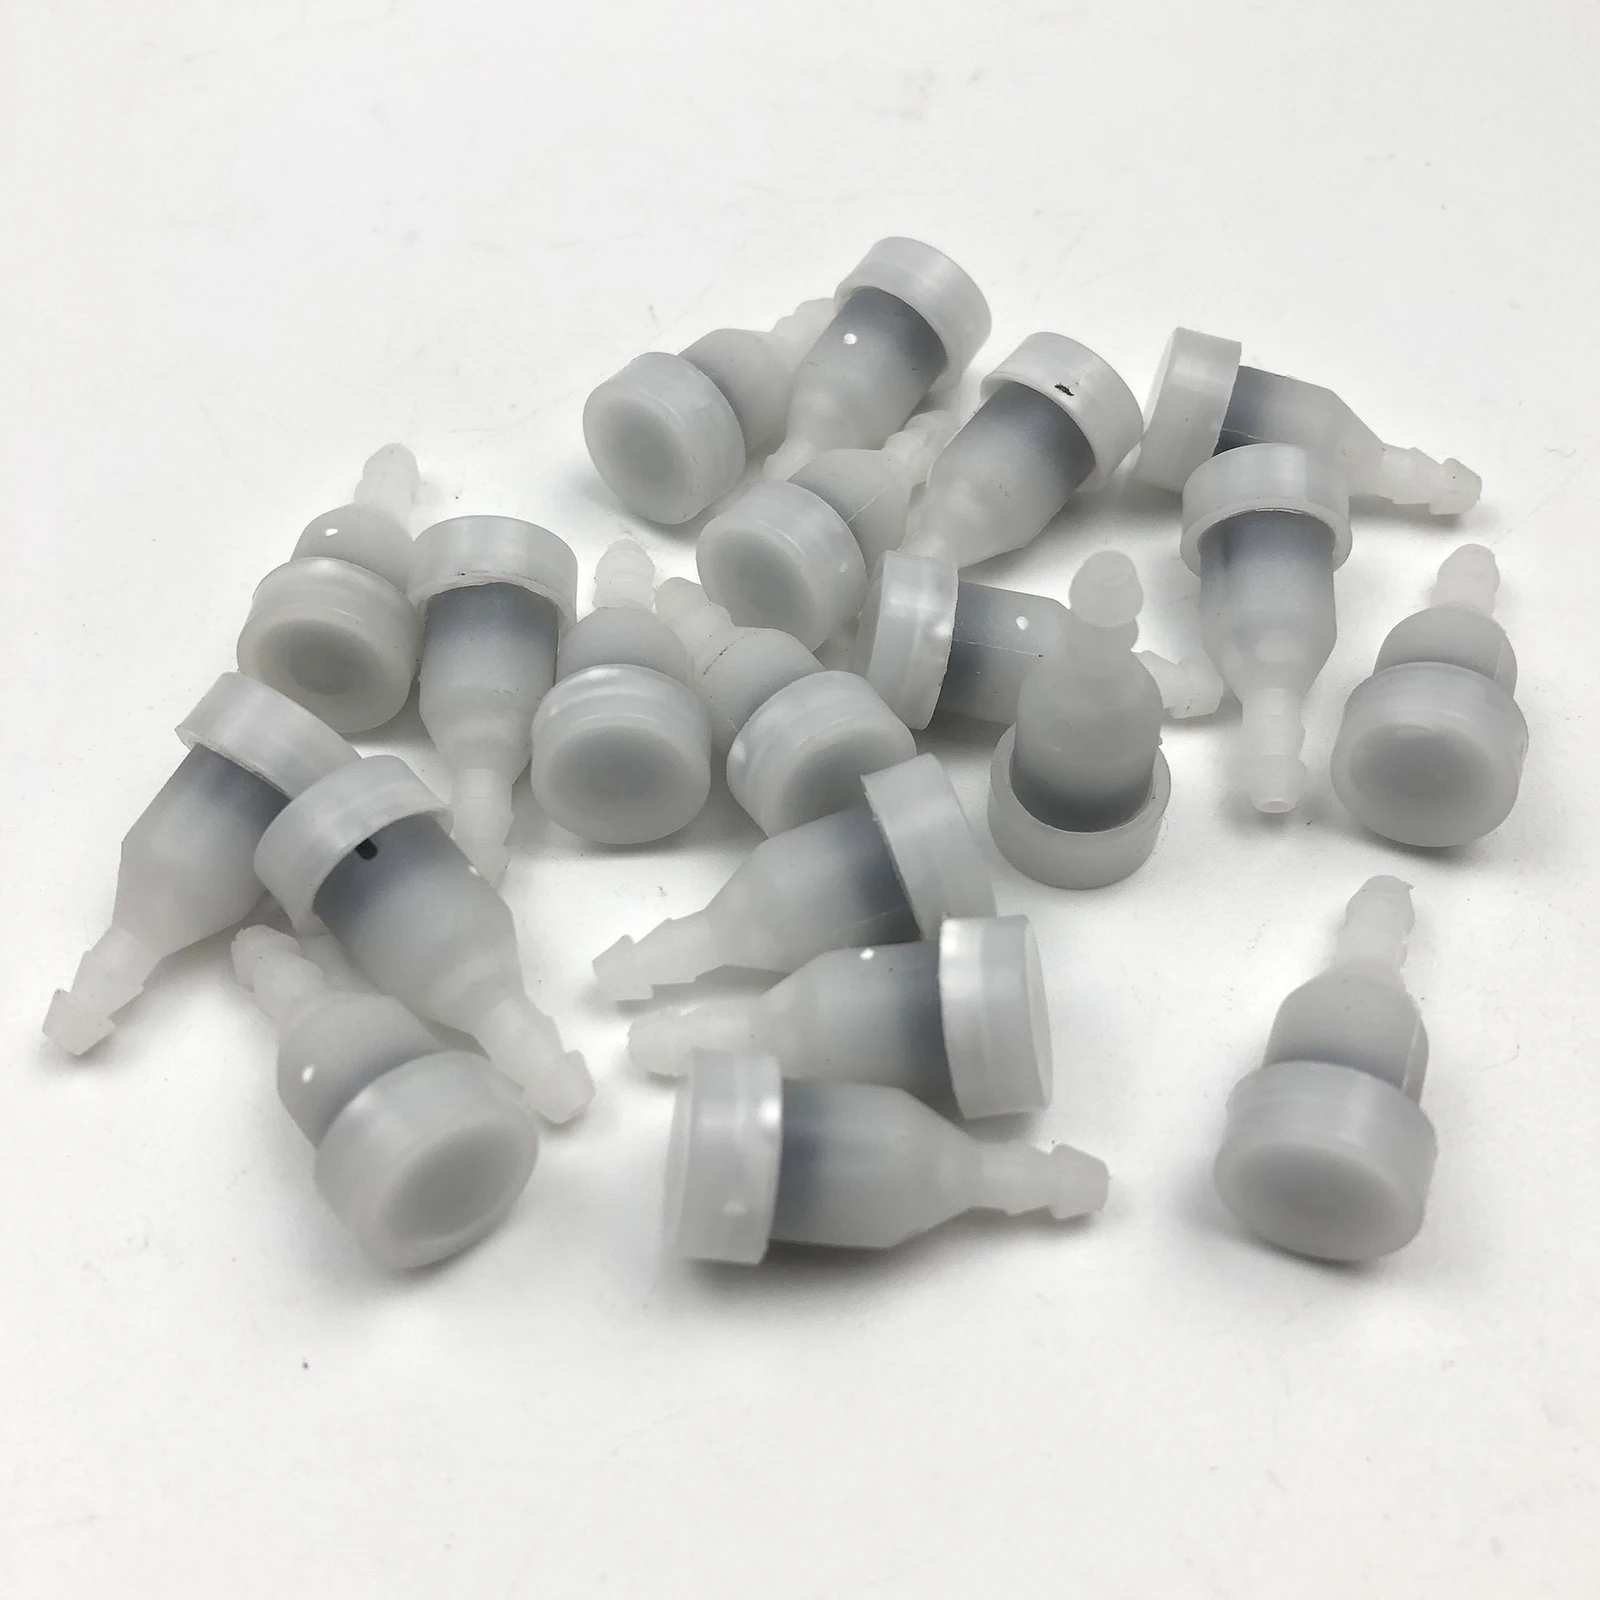 20 Pack of Fuel Tank Vent Breather for Stihl MS390 MS310 MS290 MS250 MS210 048 039 038 029 028 025 023 021 Chainsaw